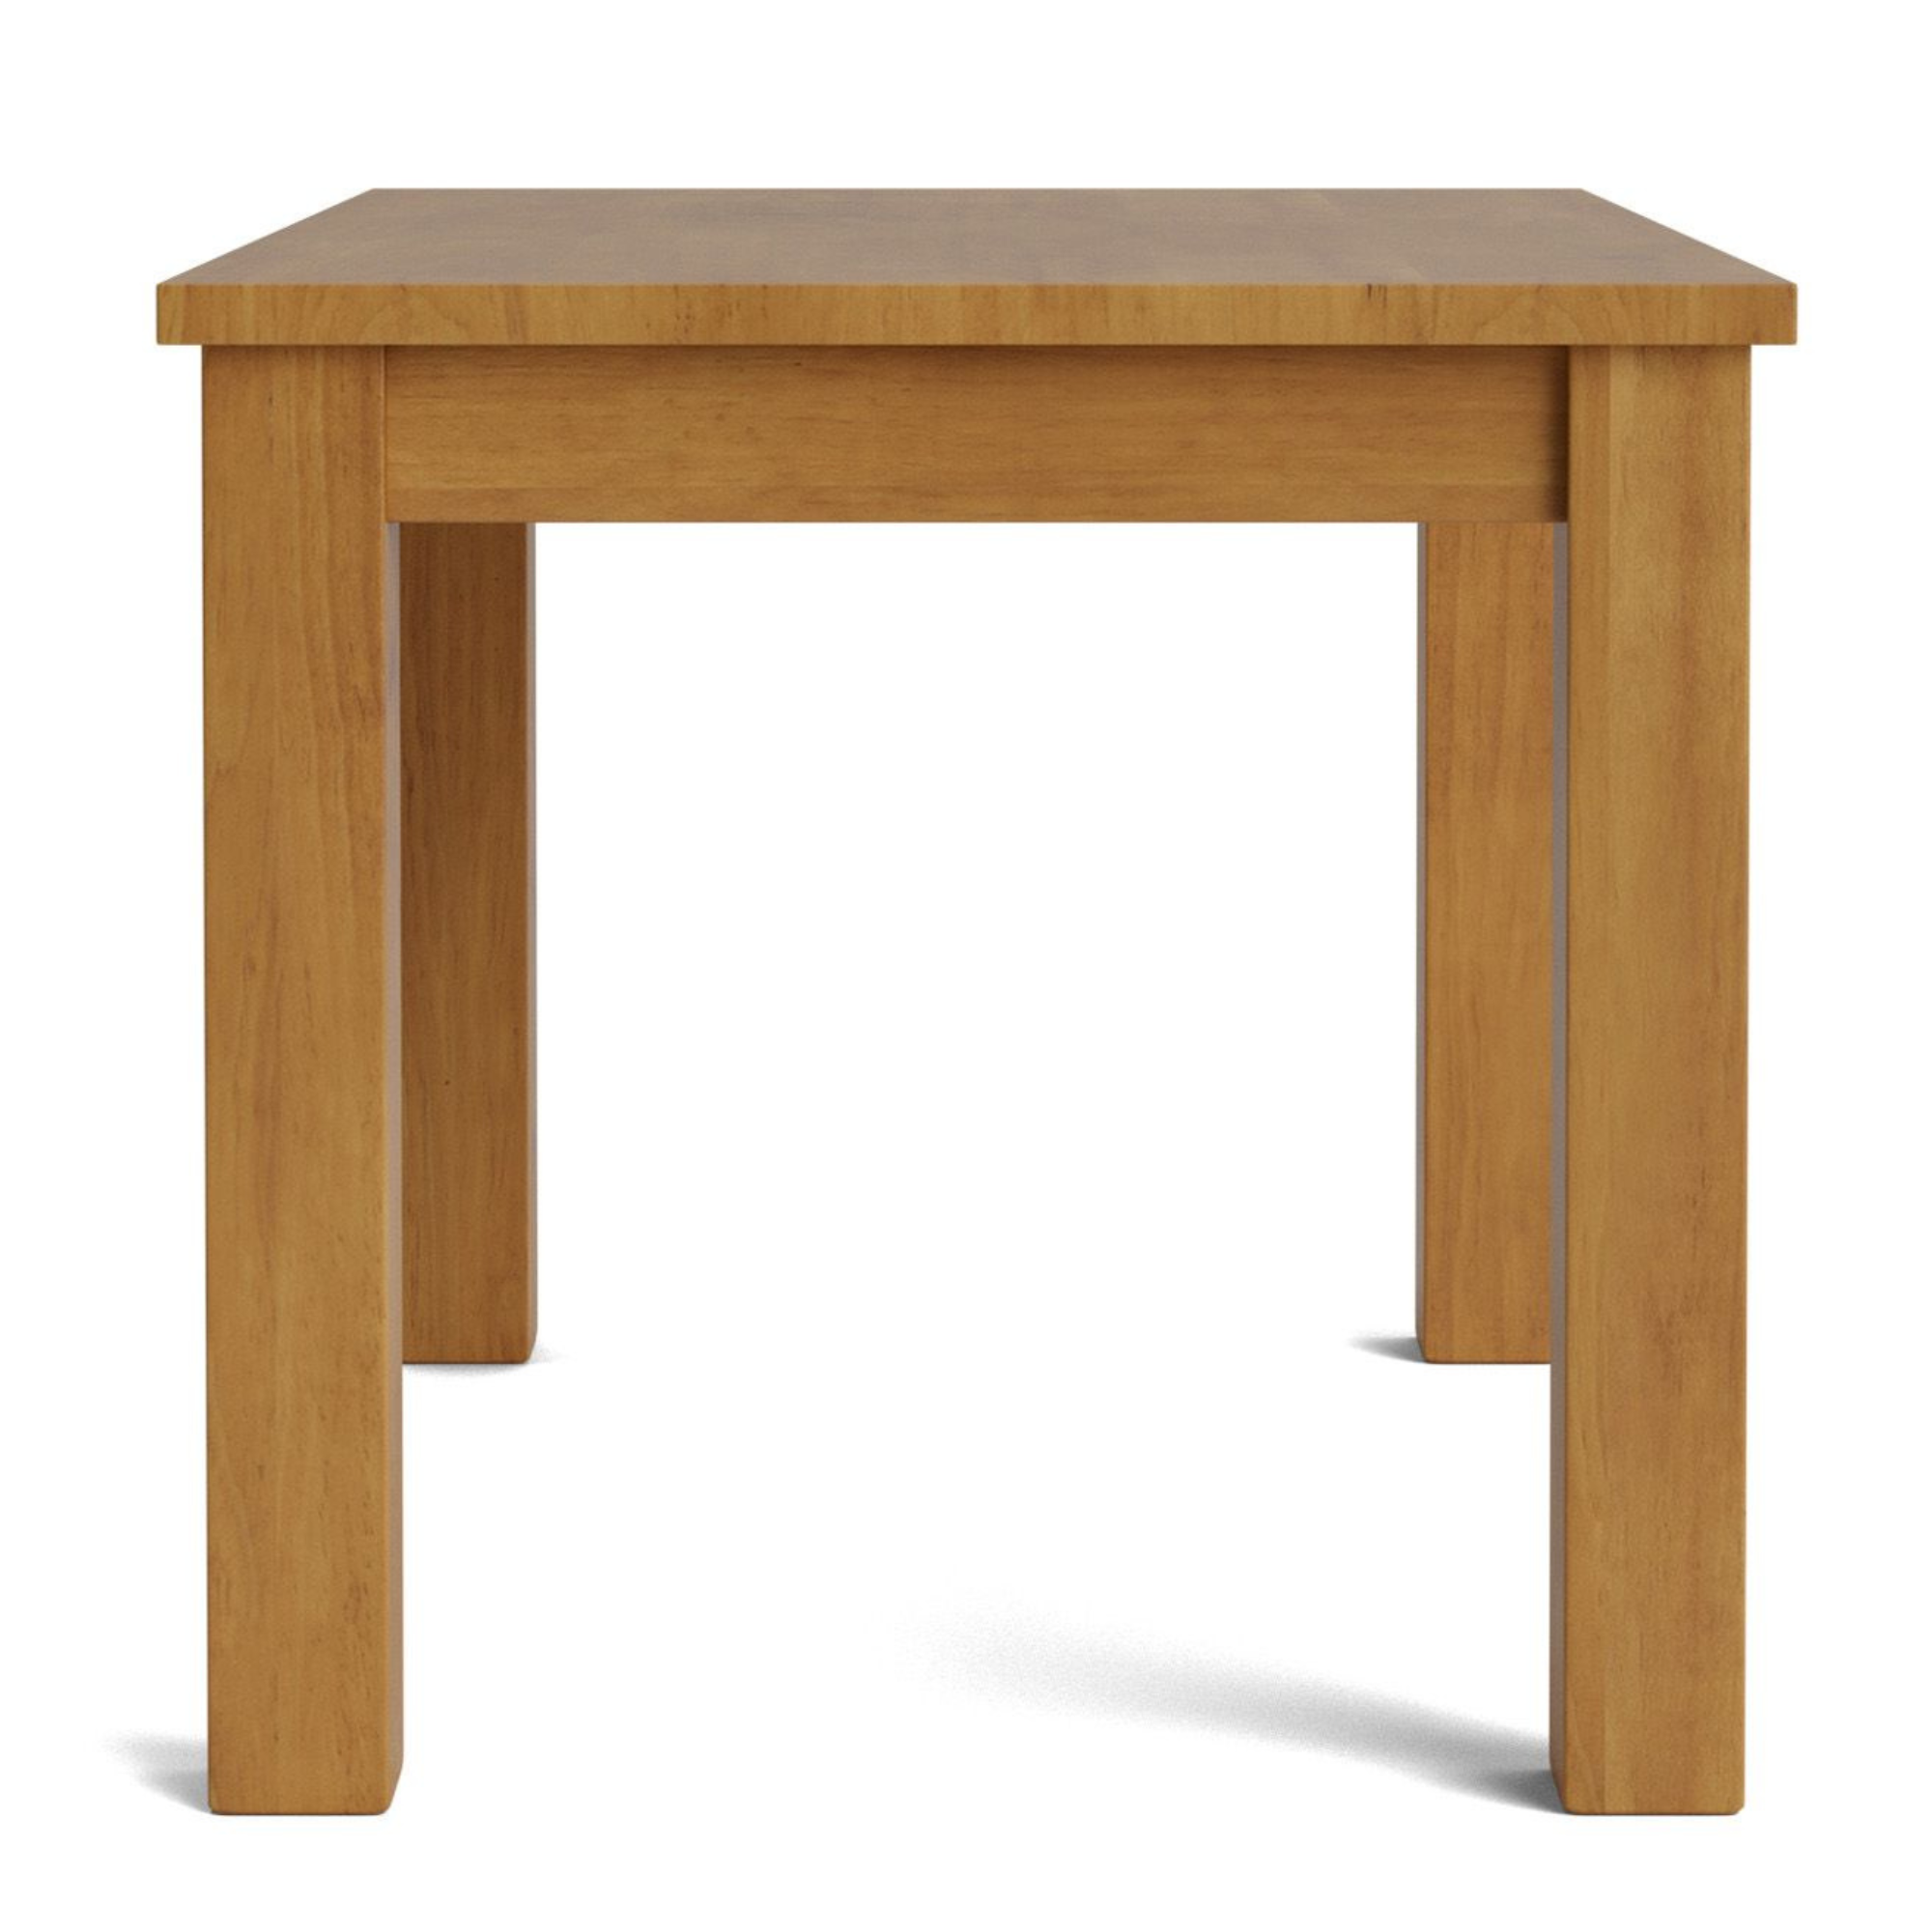 CHARLTON 1200 DINING TABLE | NZ MADE